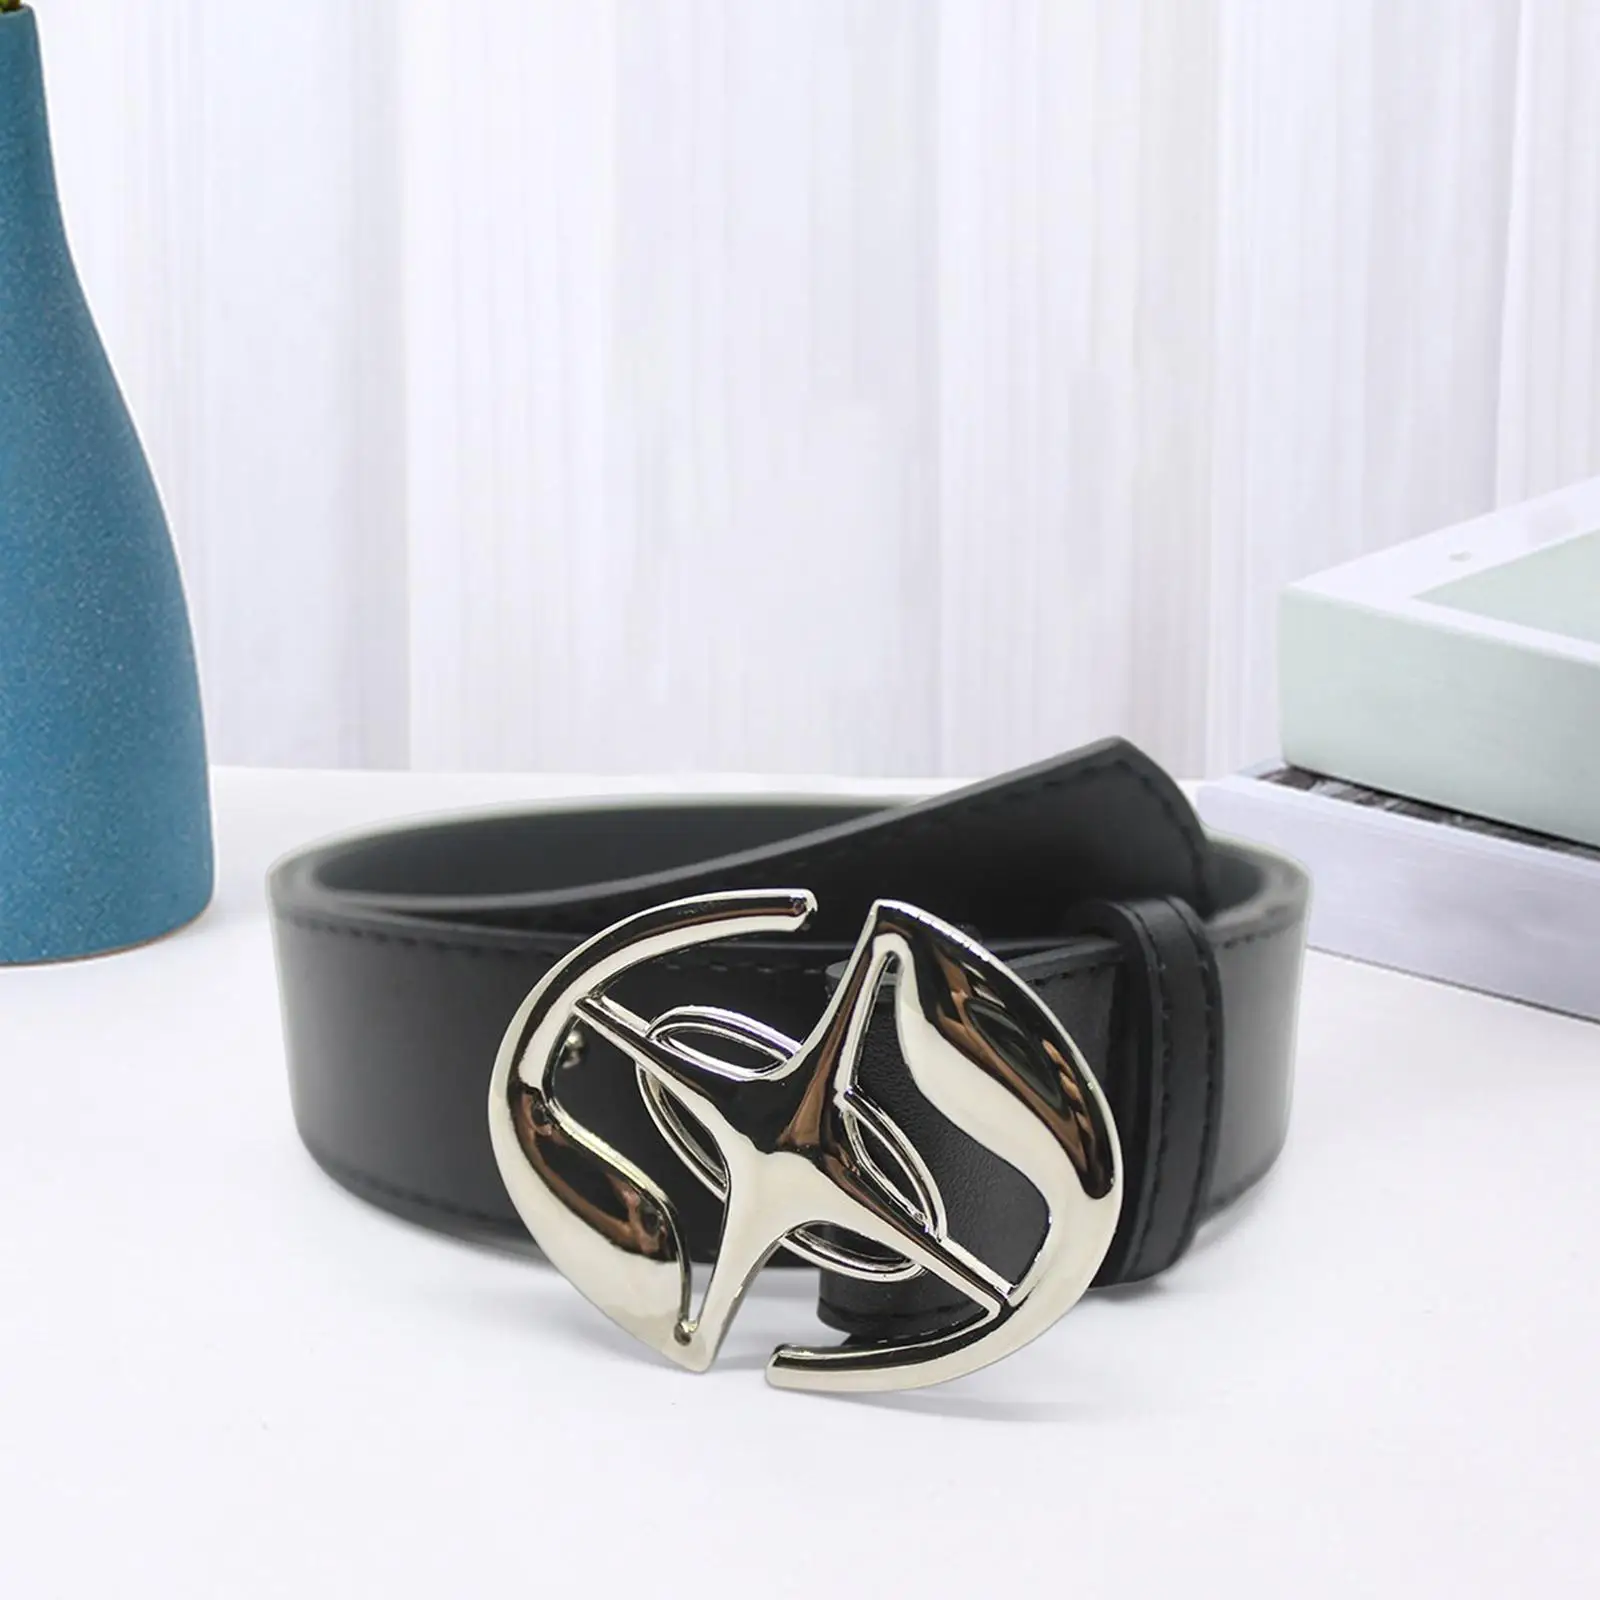 Women PU Leather Belt Fashion Versatile Adjustable Casual for Sweaters Jeans